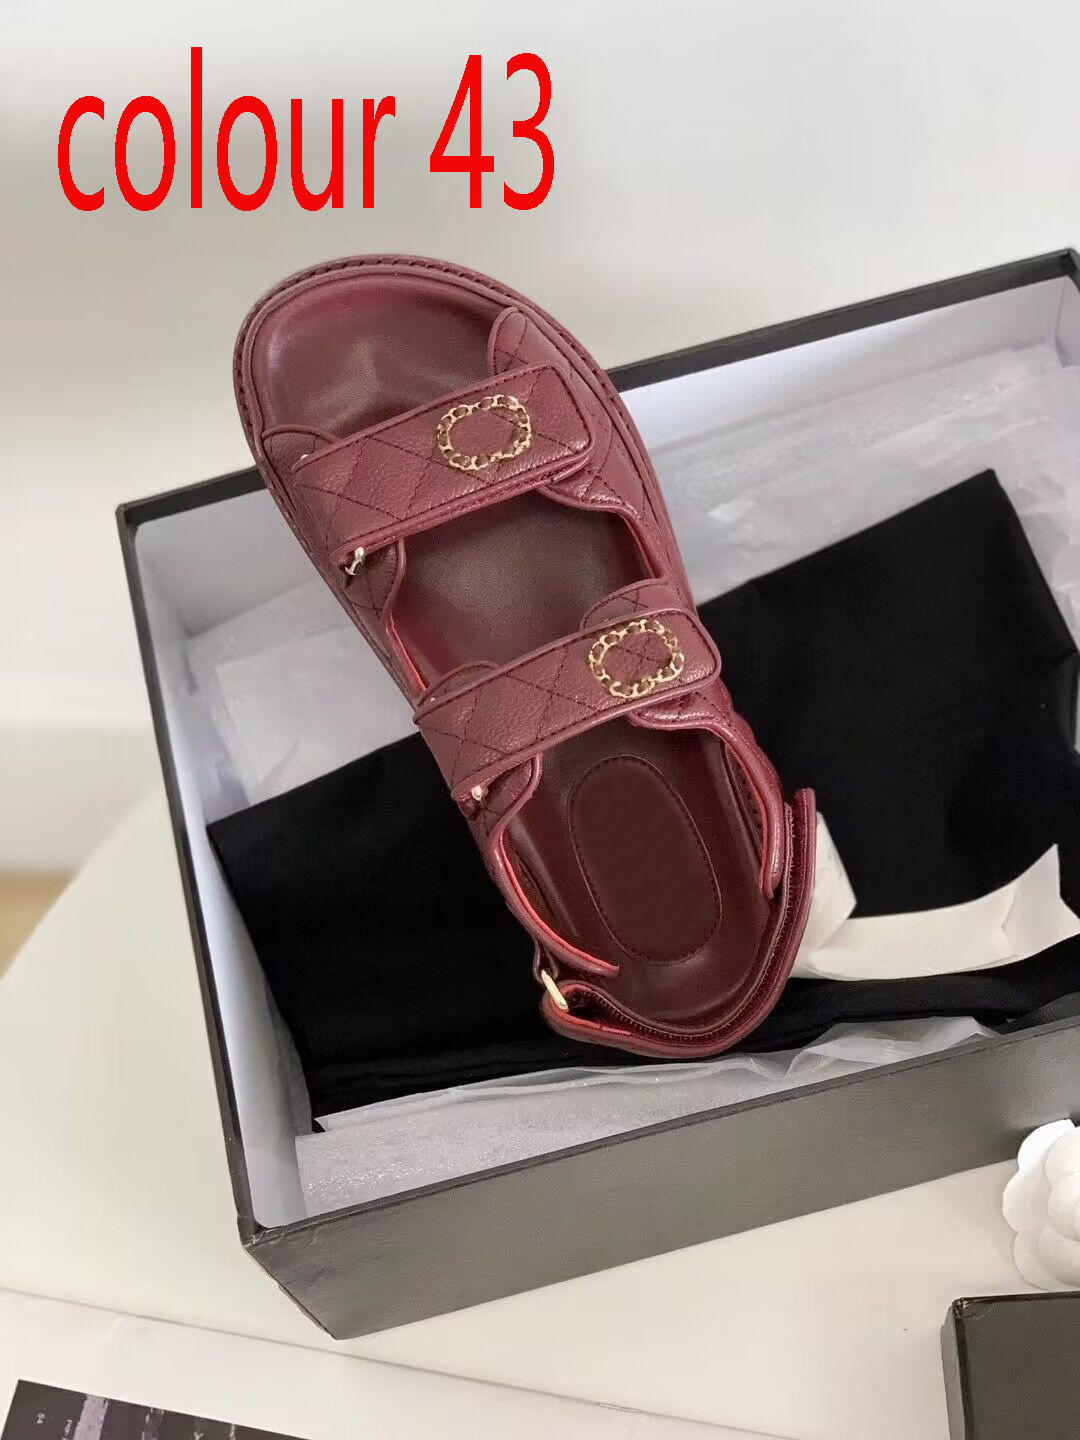 designer shoes beach sandal Thick bottom Sports sandals Trainers fashion Leather Casual woman SHoes velvet Letter Platform lady shoe size 35-40-41-42 us4-us11 With box